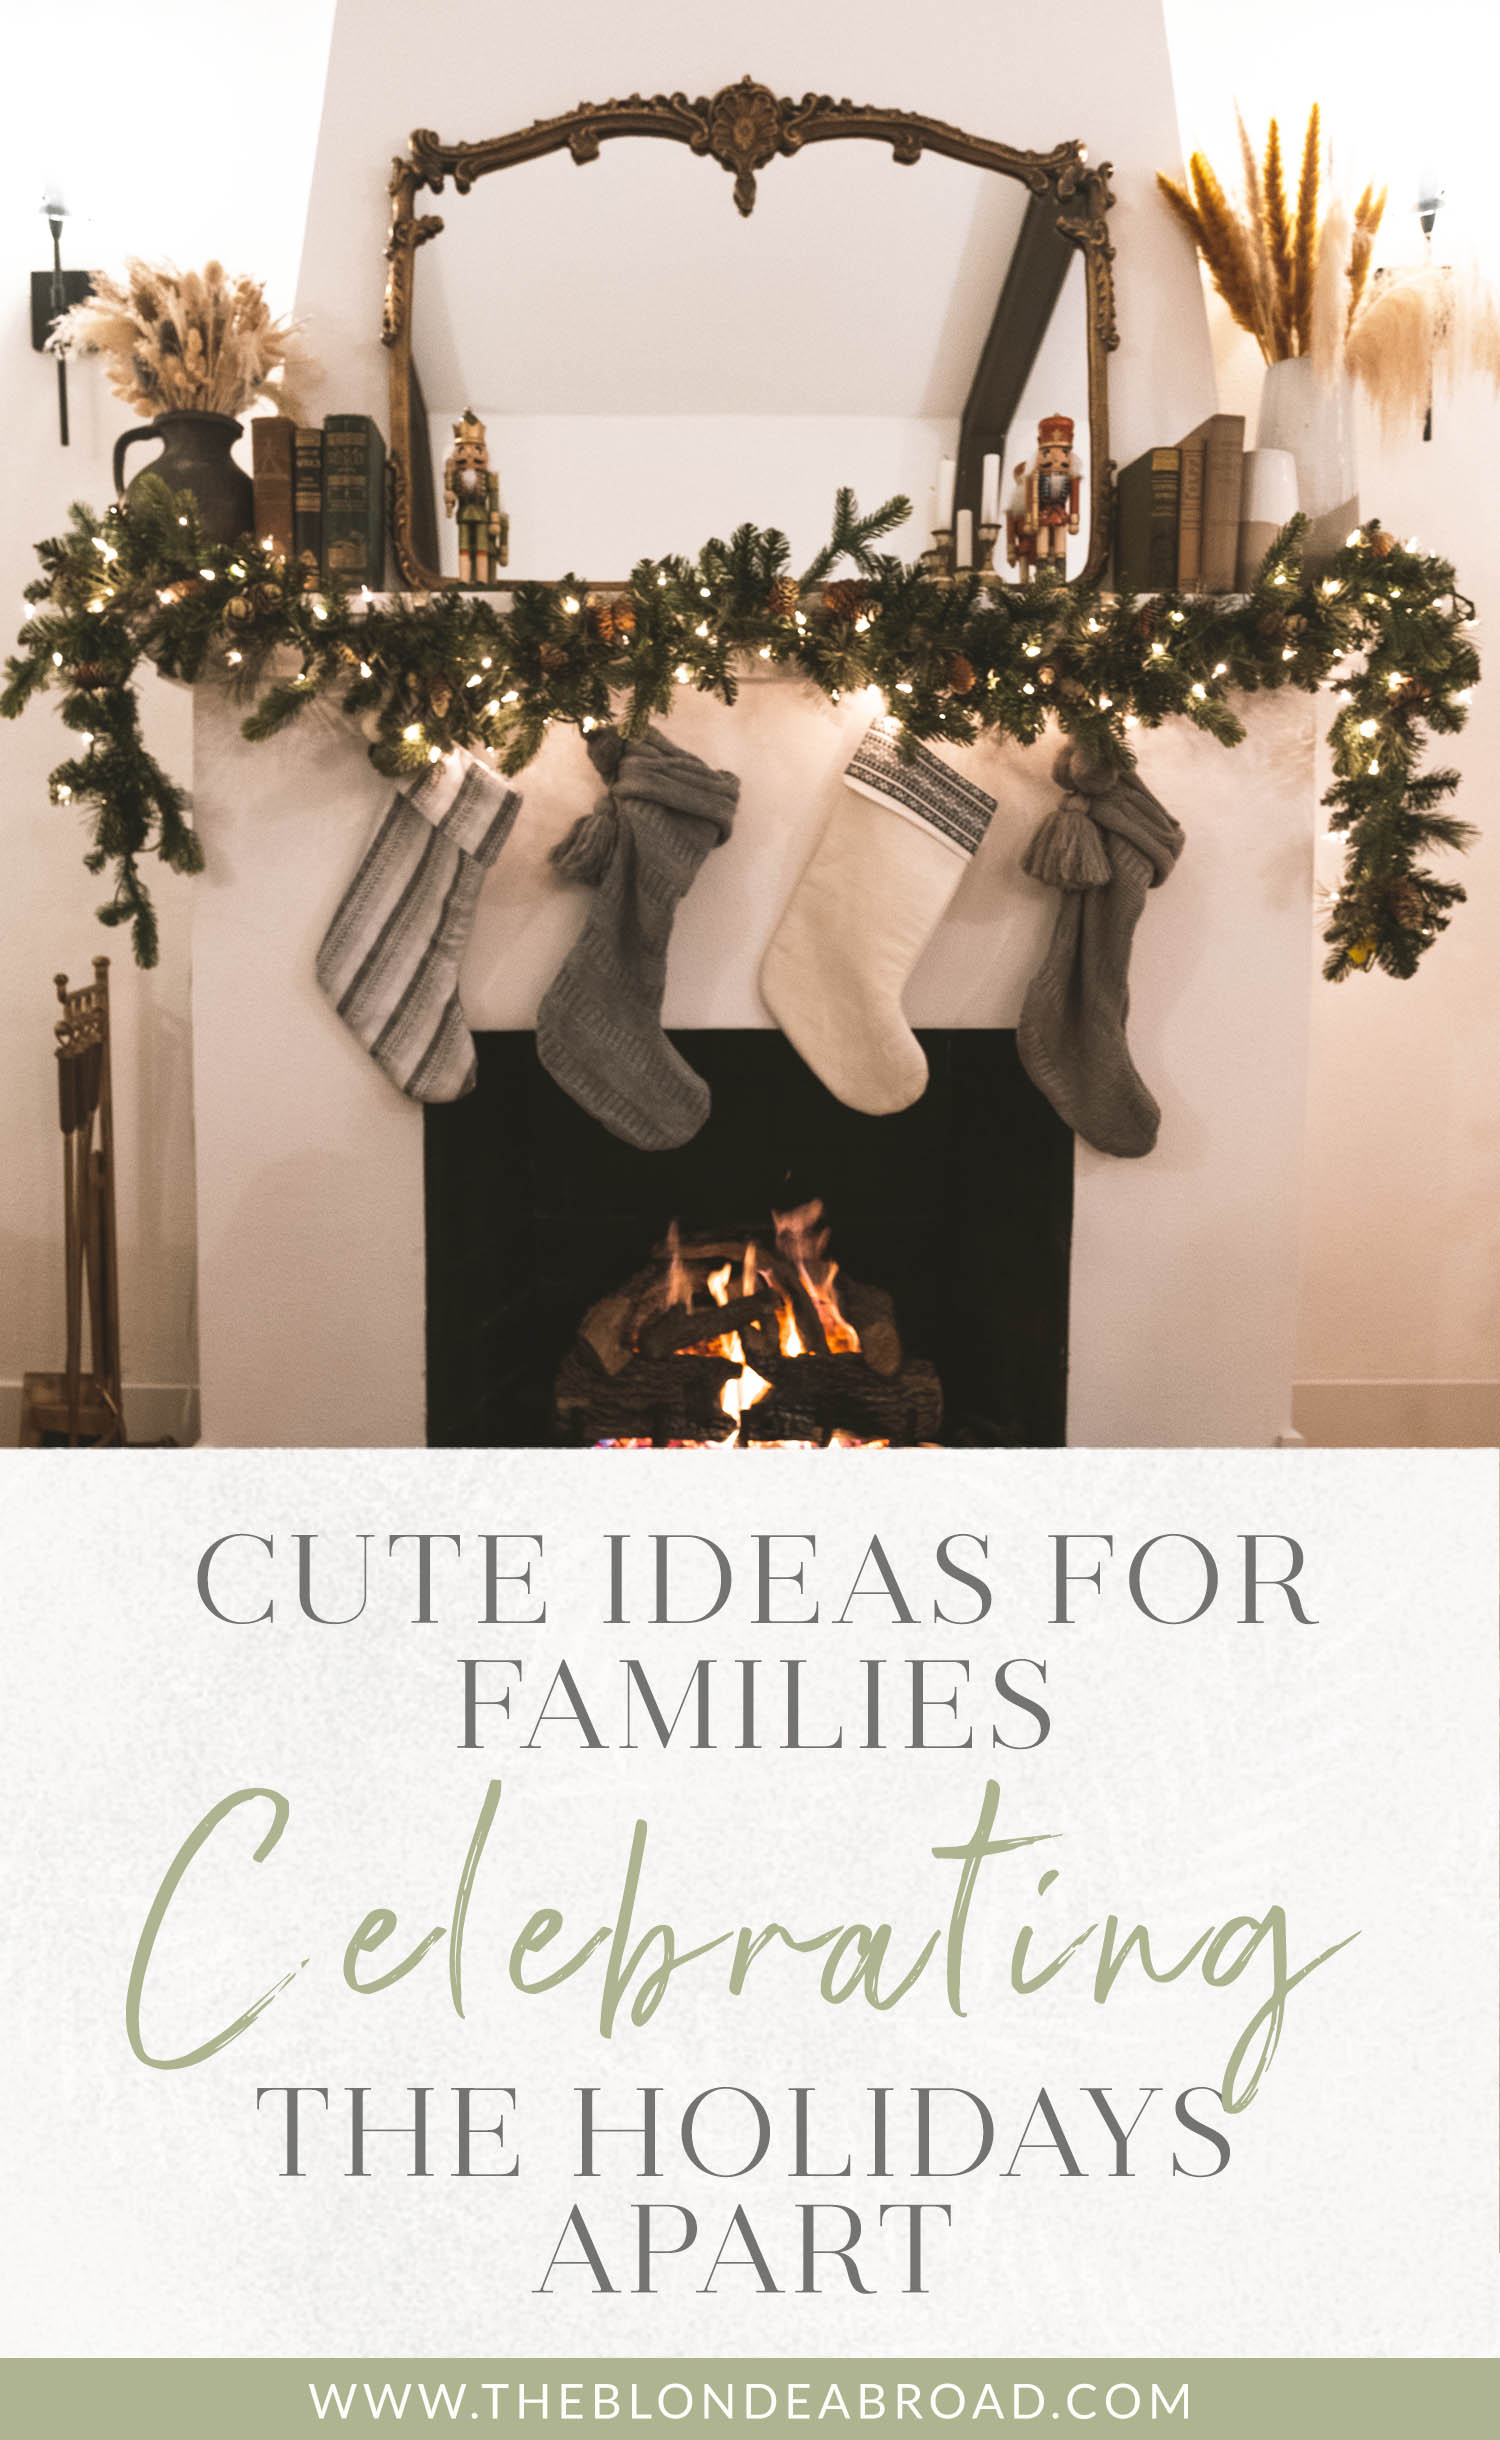 Cute Ideas for Families Celebrating Holidays Apart